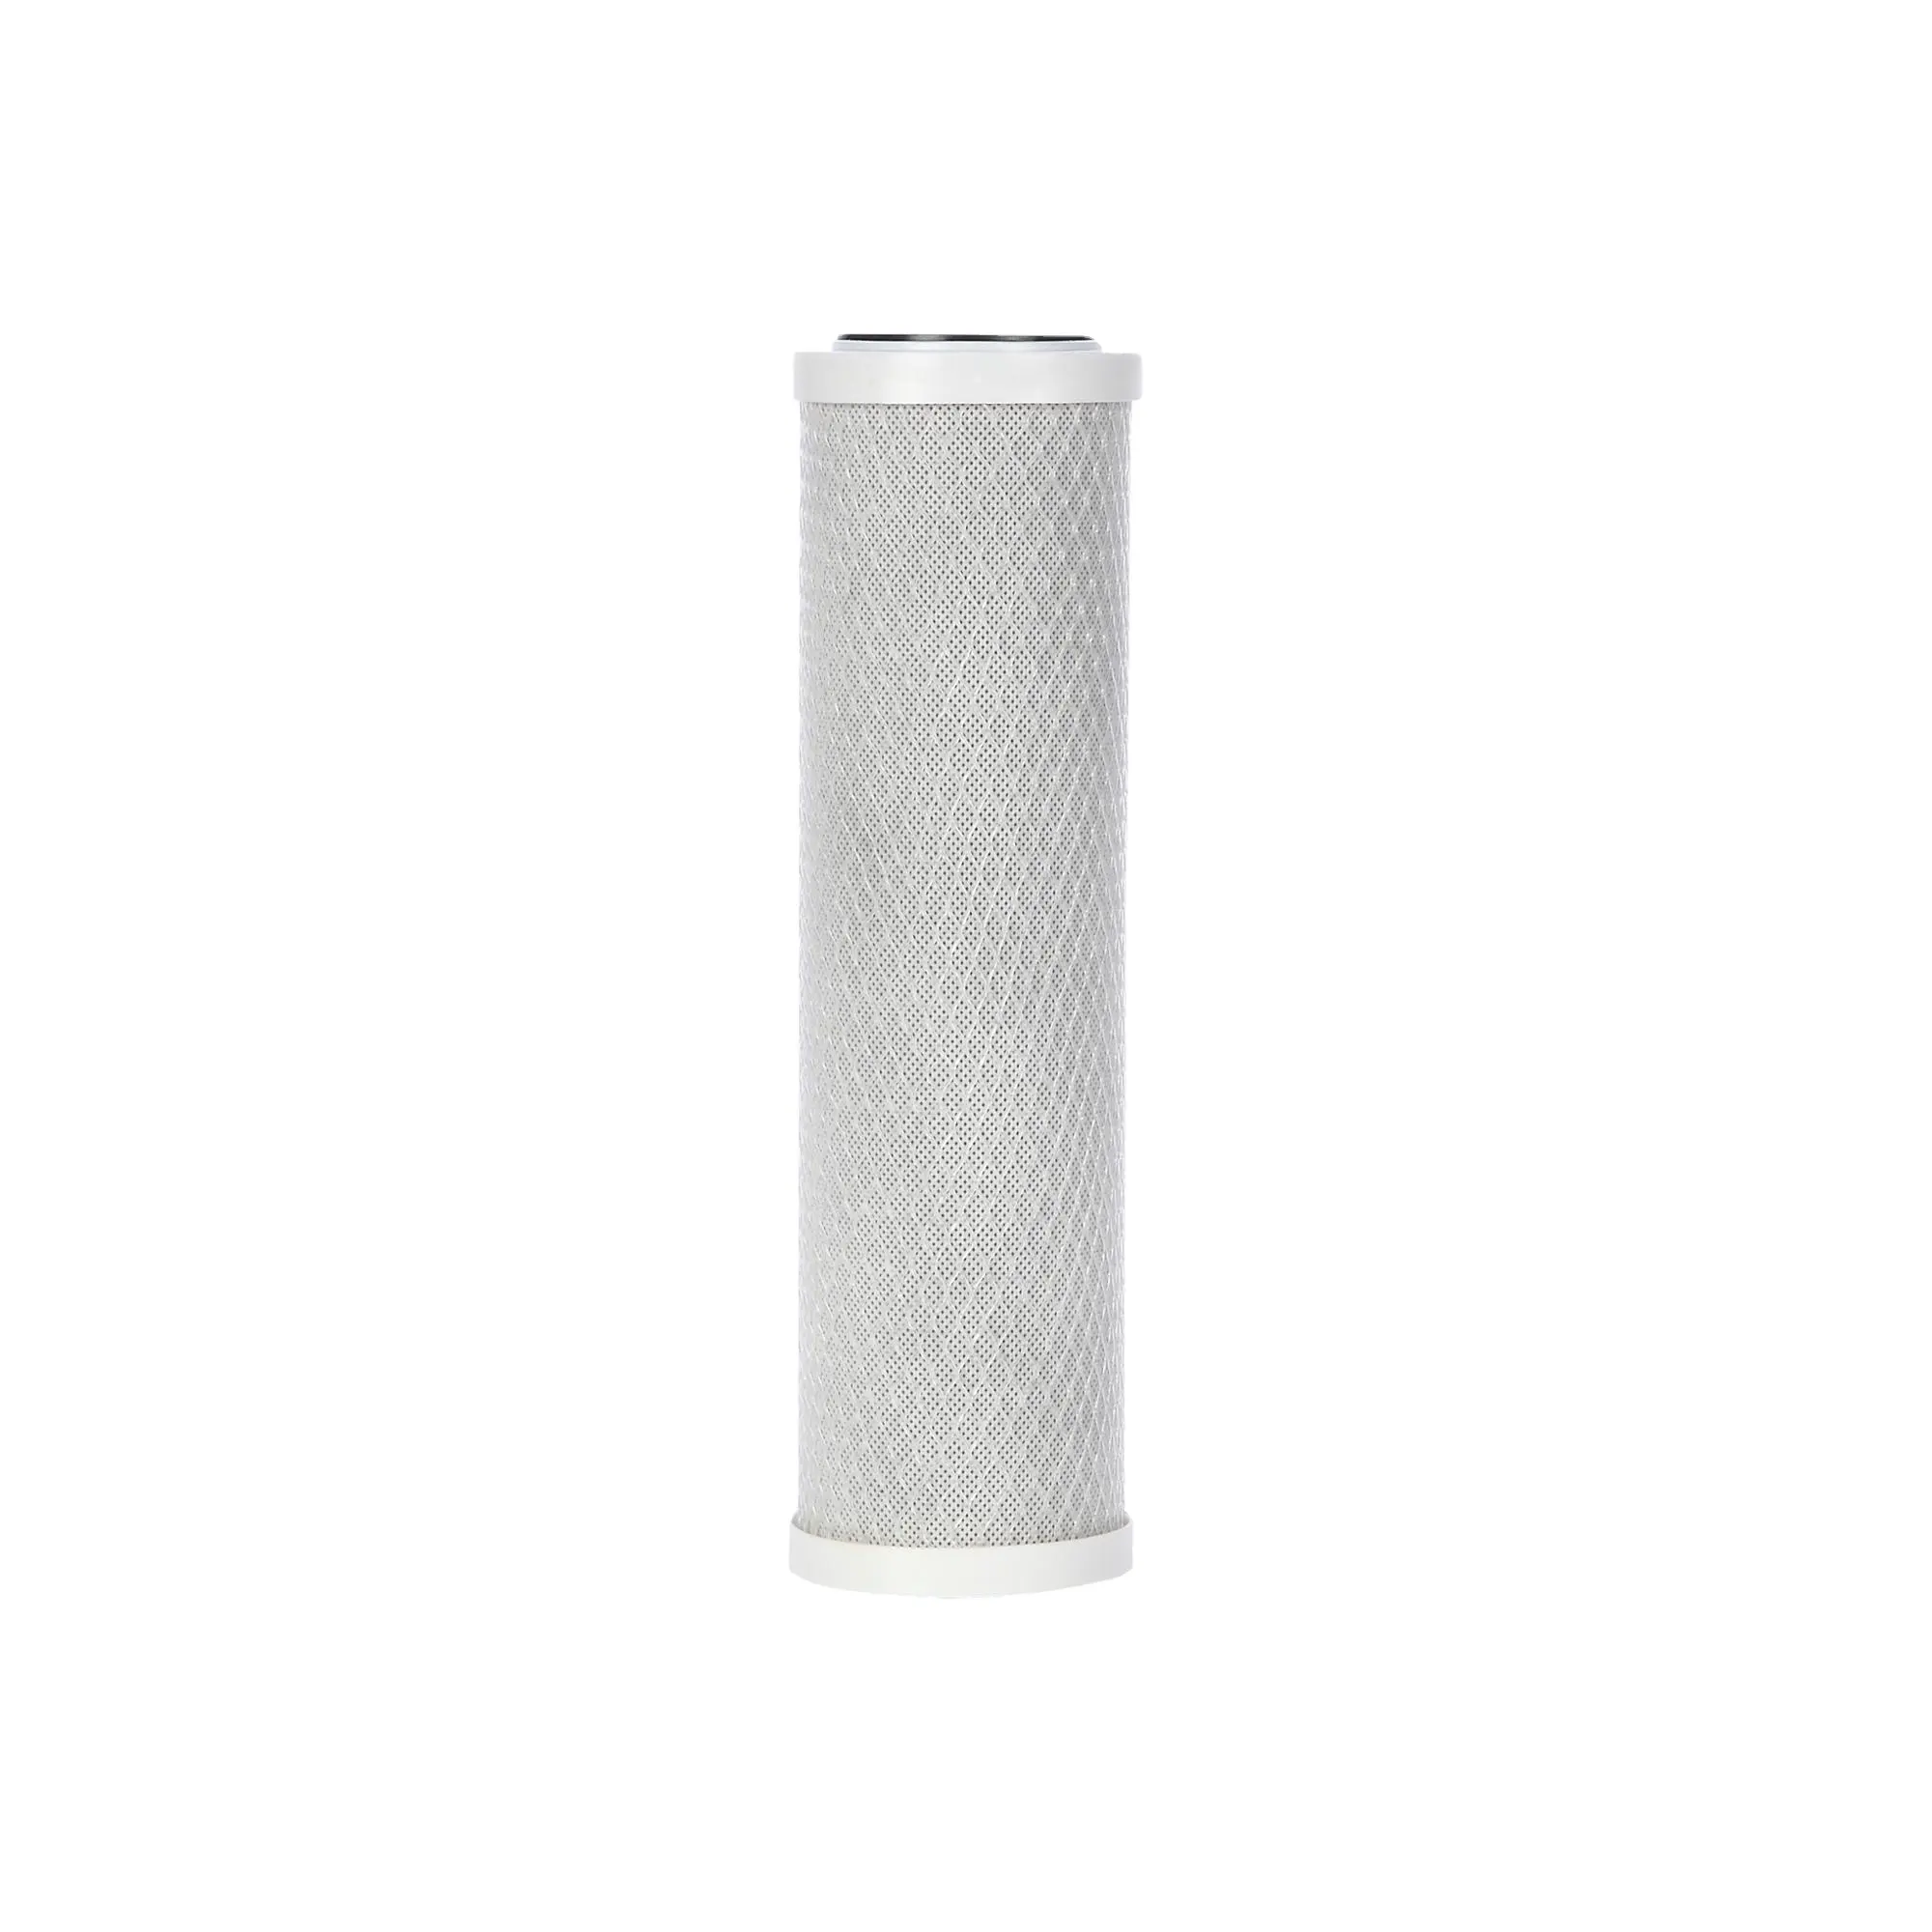 Taiwan 5 micron activated carbon filter / 10 inch water filter cartridge for ro system